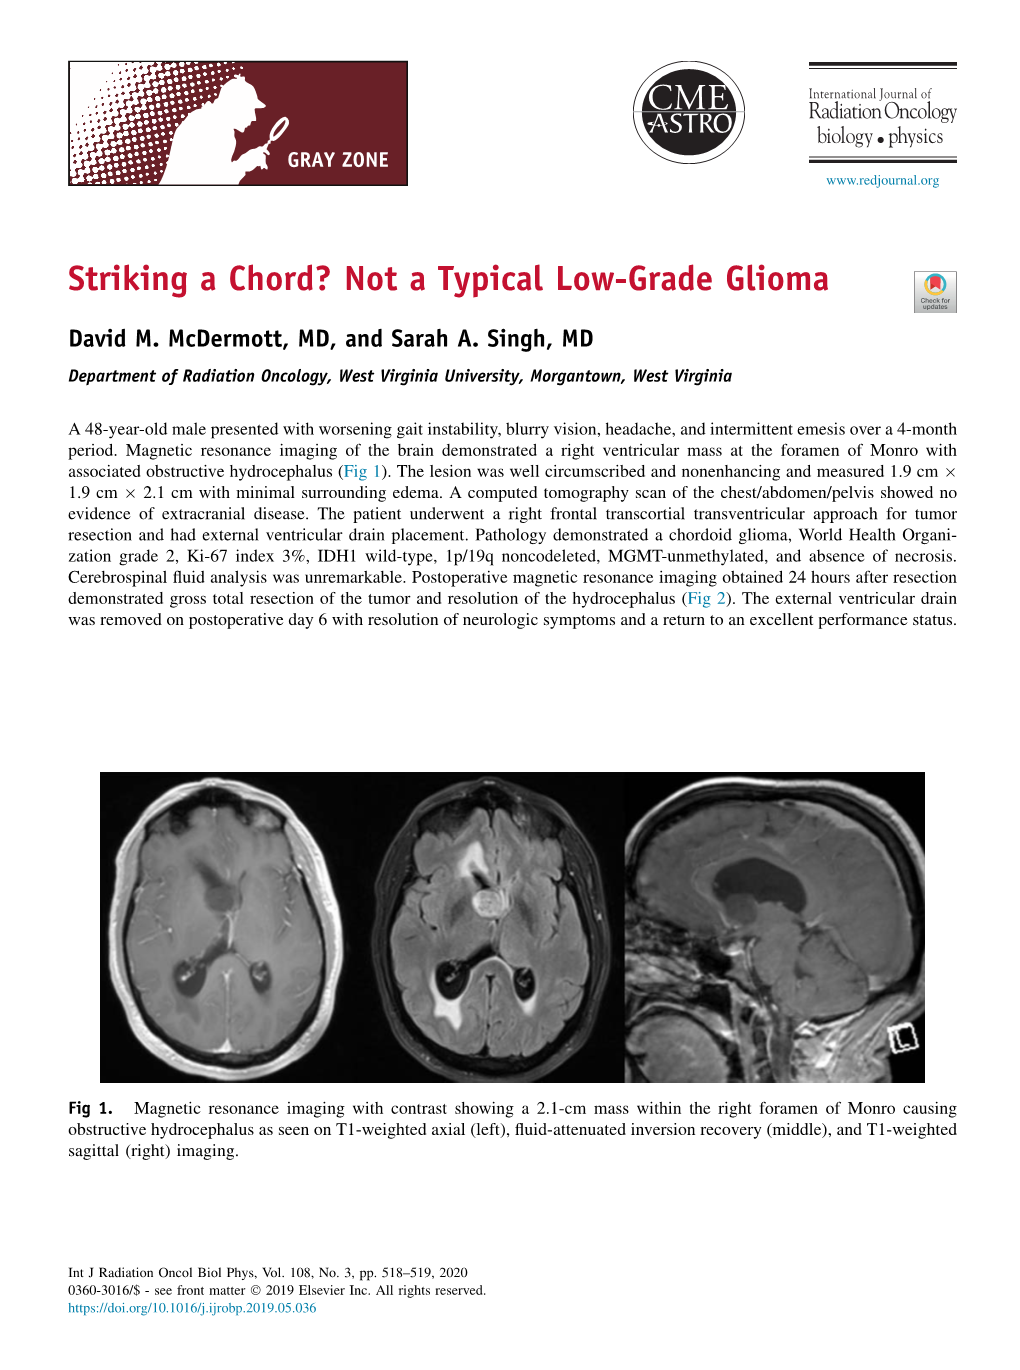 Striking a Chord? Not a Typical Low-Grade Glioma